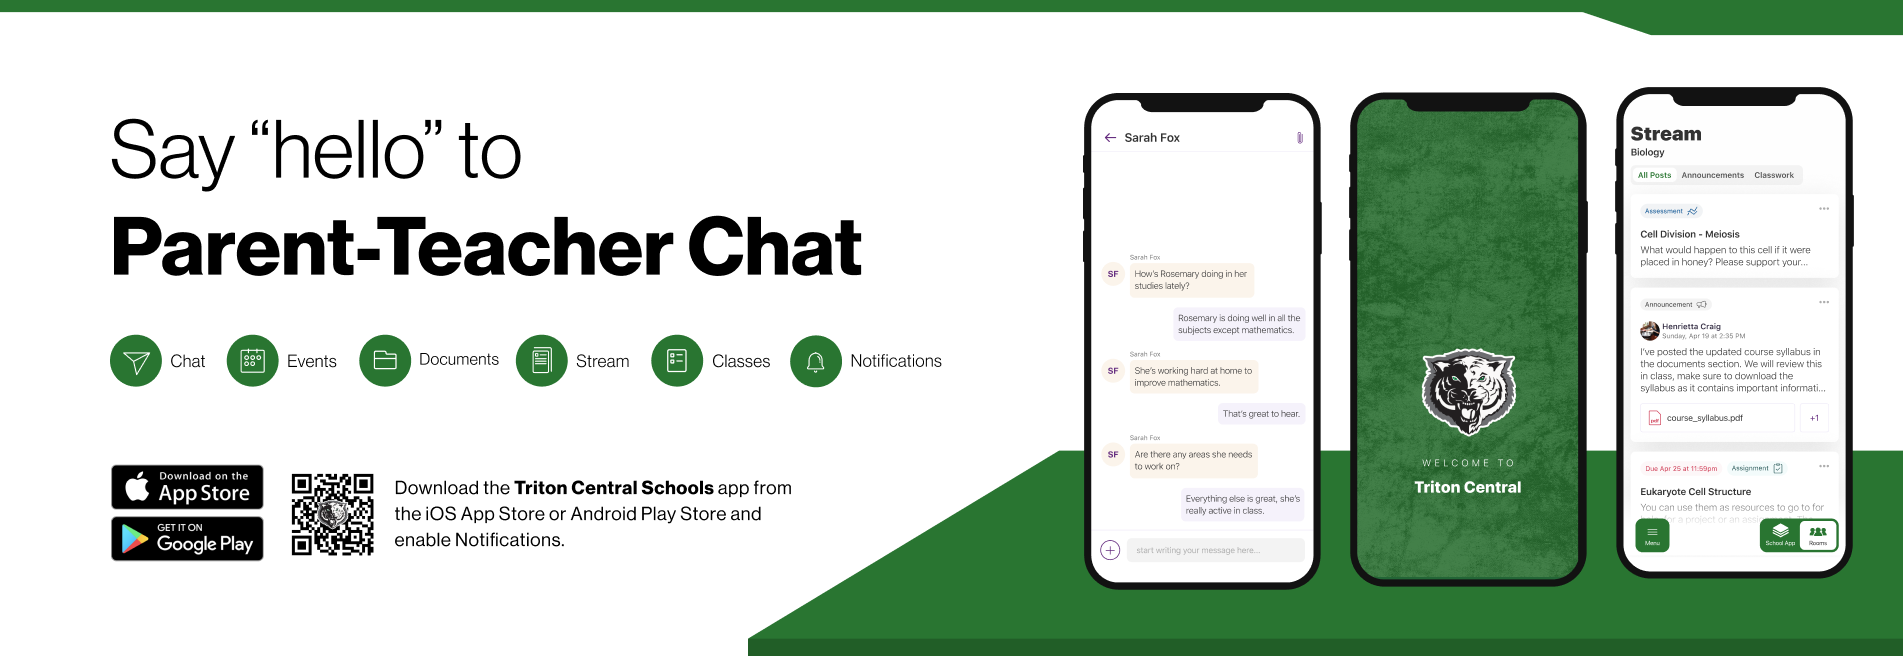 Say hello to Parent-Teacher chat in the new Rooms app. Download the Triton Central app in the Google Play or Apple App store.